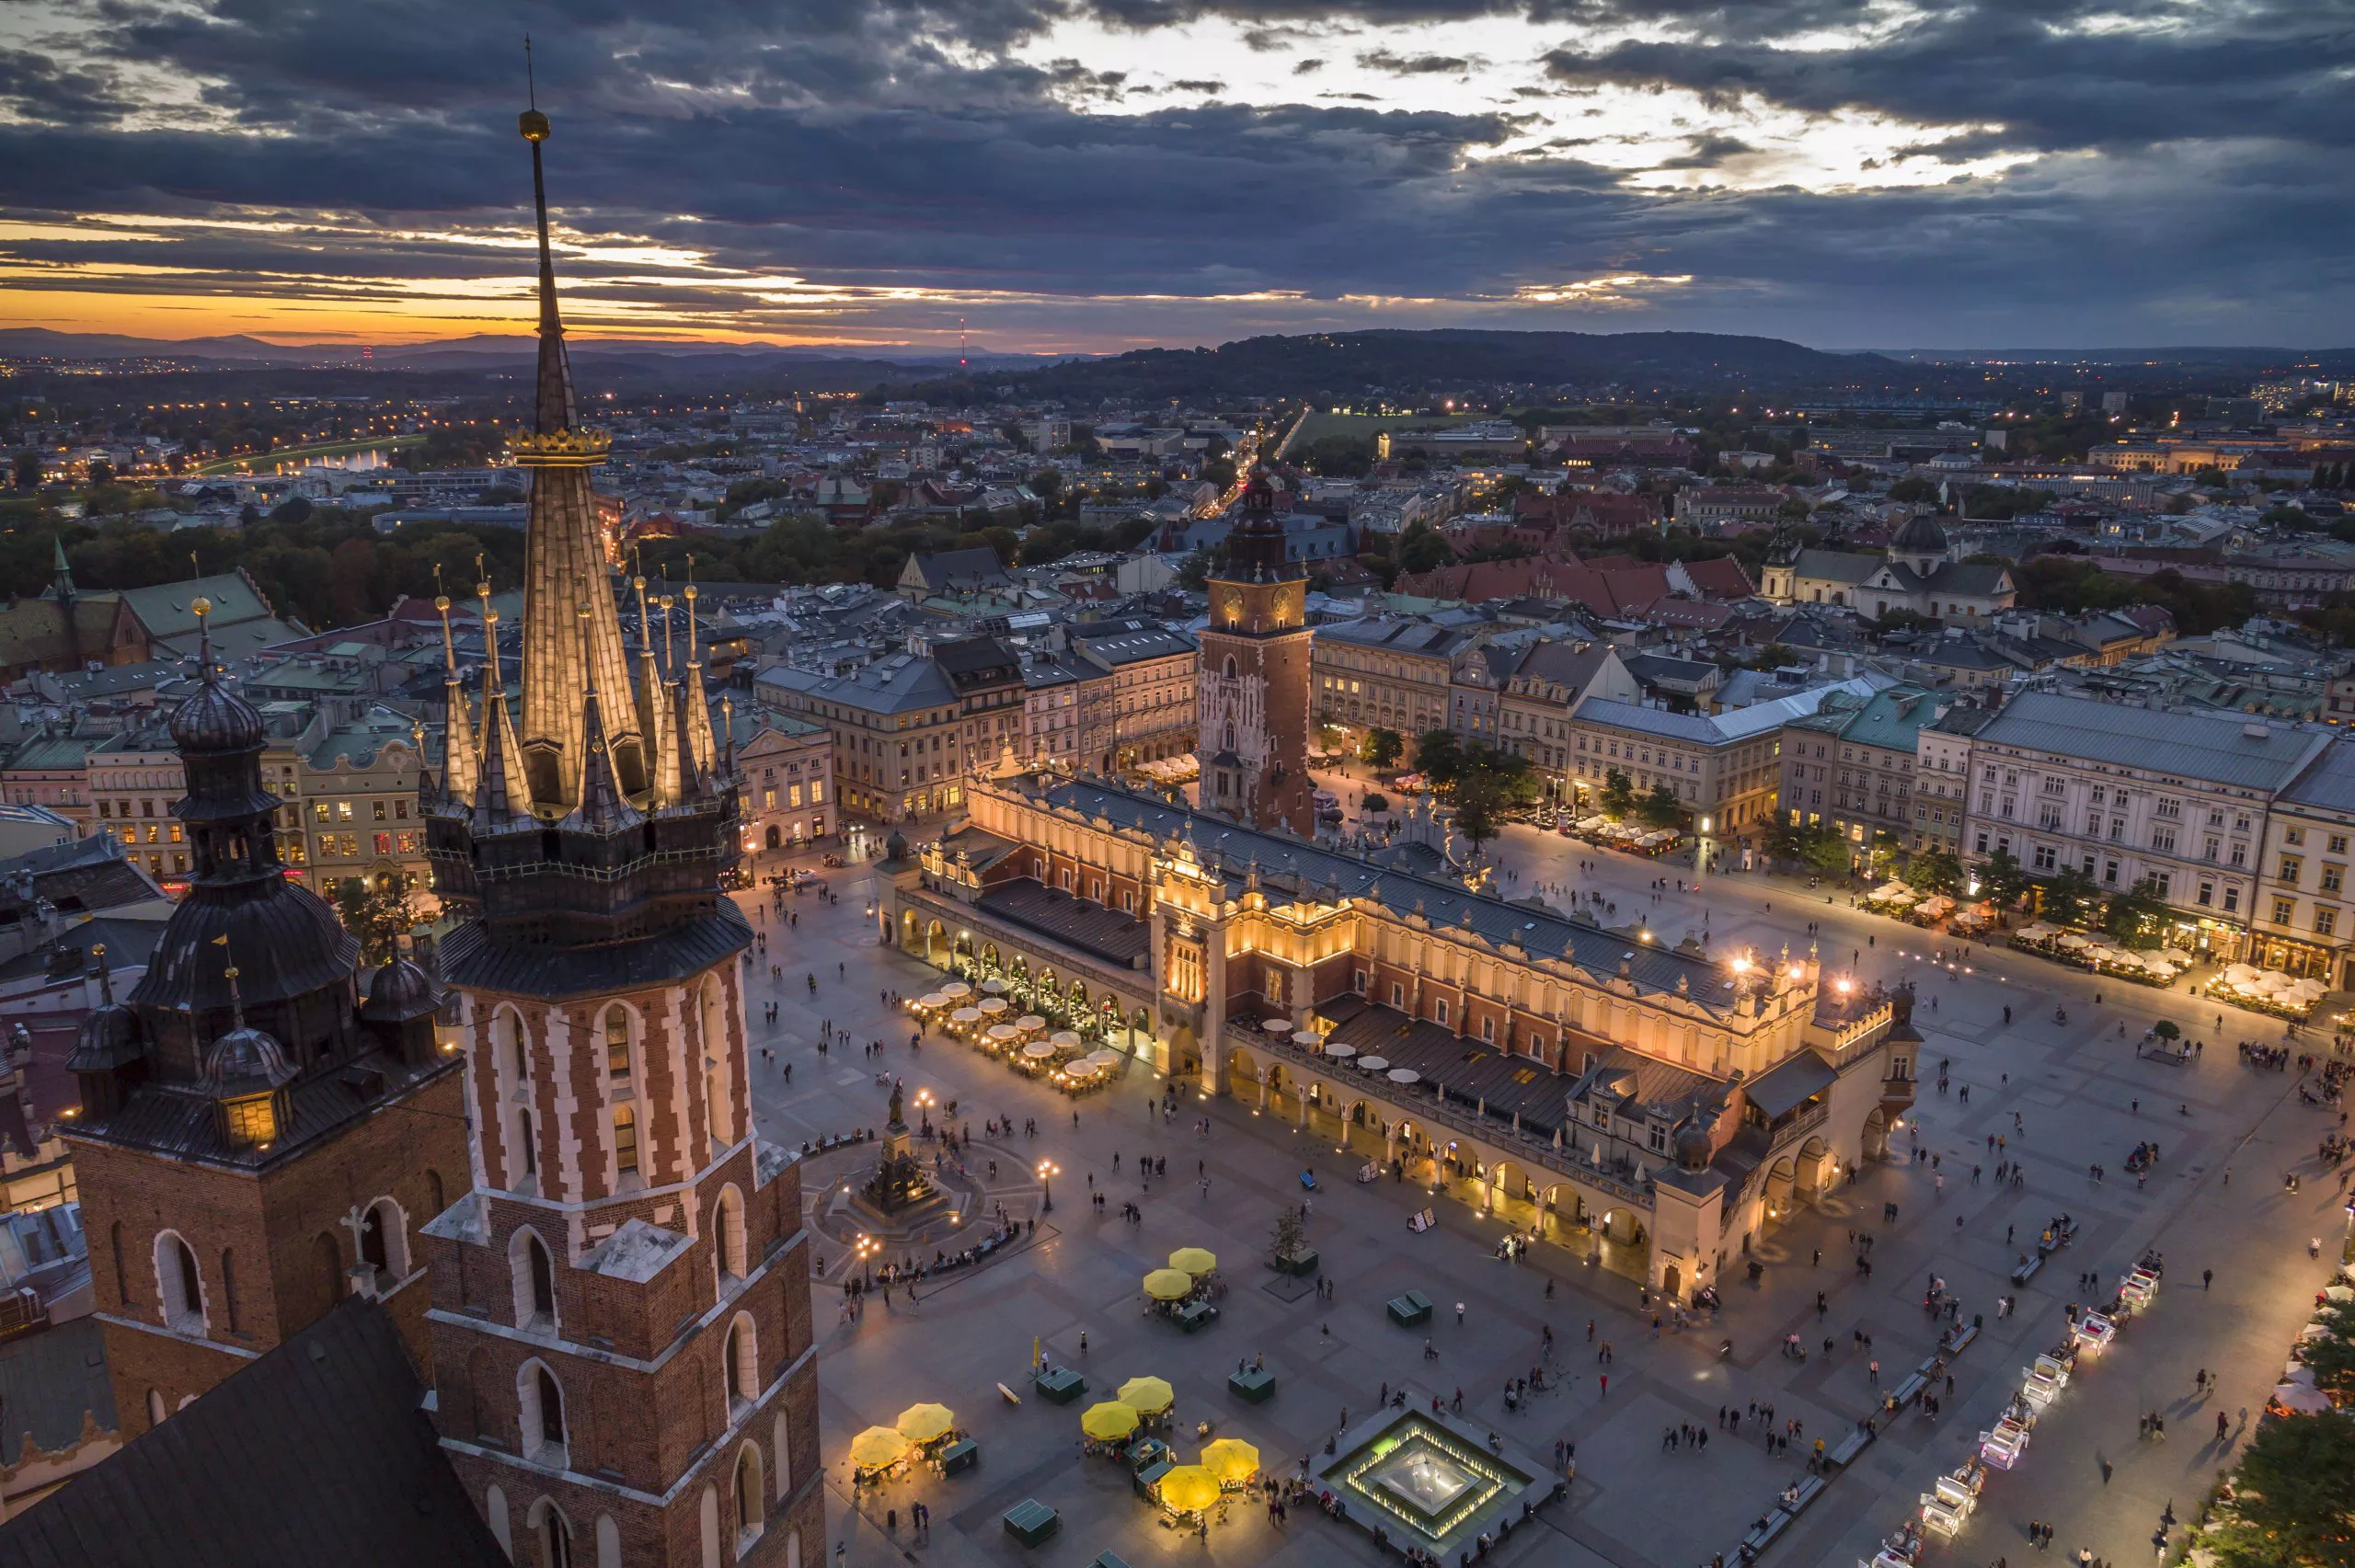 A night-time bird’s eye view of the historical city centre of Kraków. The two towers of unequal height of St Mary’s visible in the foreground on the left stand against a broad background of artificially lit Main Market Square. Standing around it are mansions and townhouses, and its centre is taken by the long Cloth Hall and the Town Hall Tower. Above, the sun is setting below dark clouds.